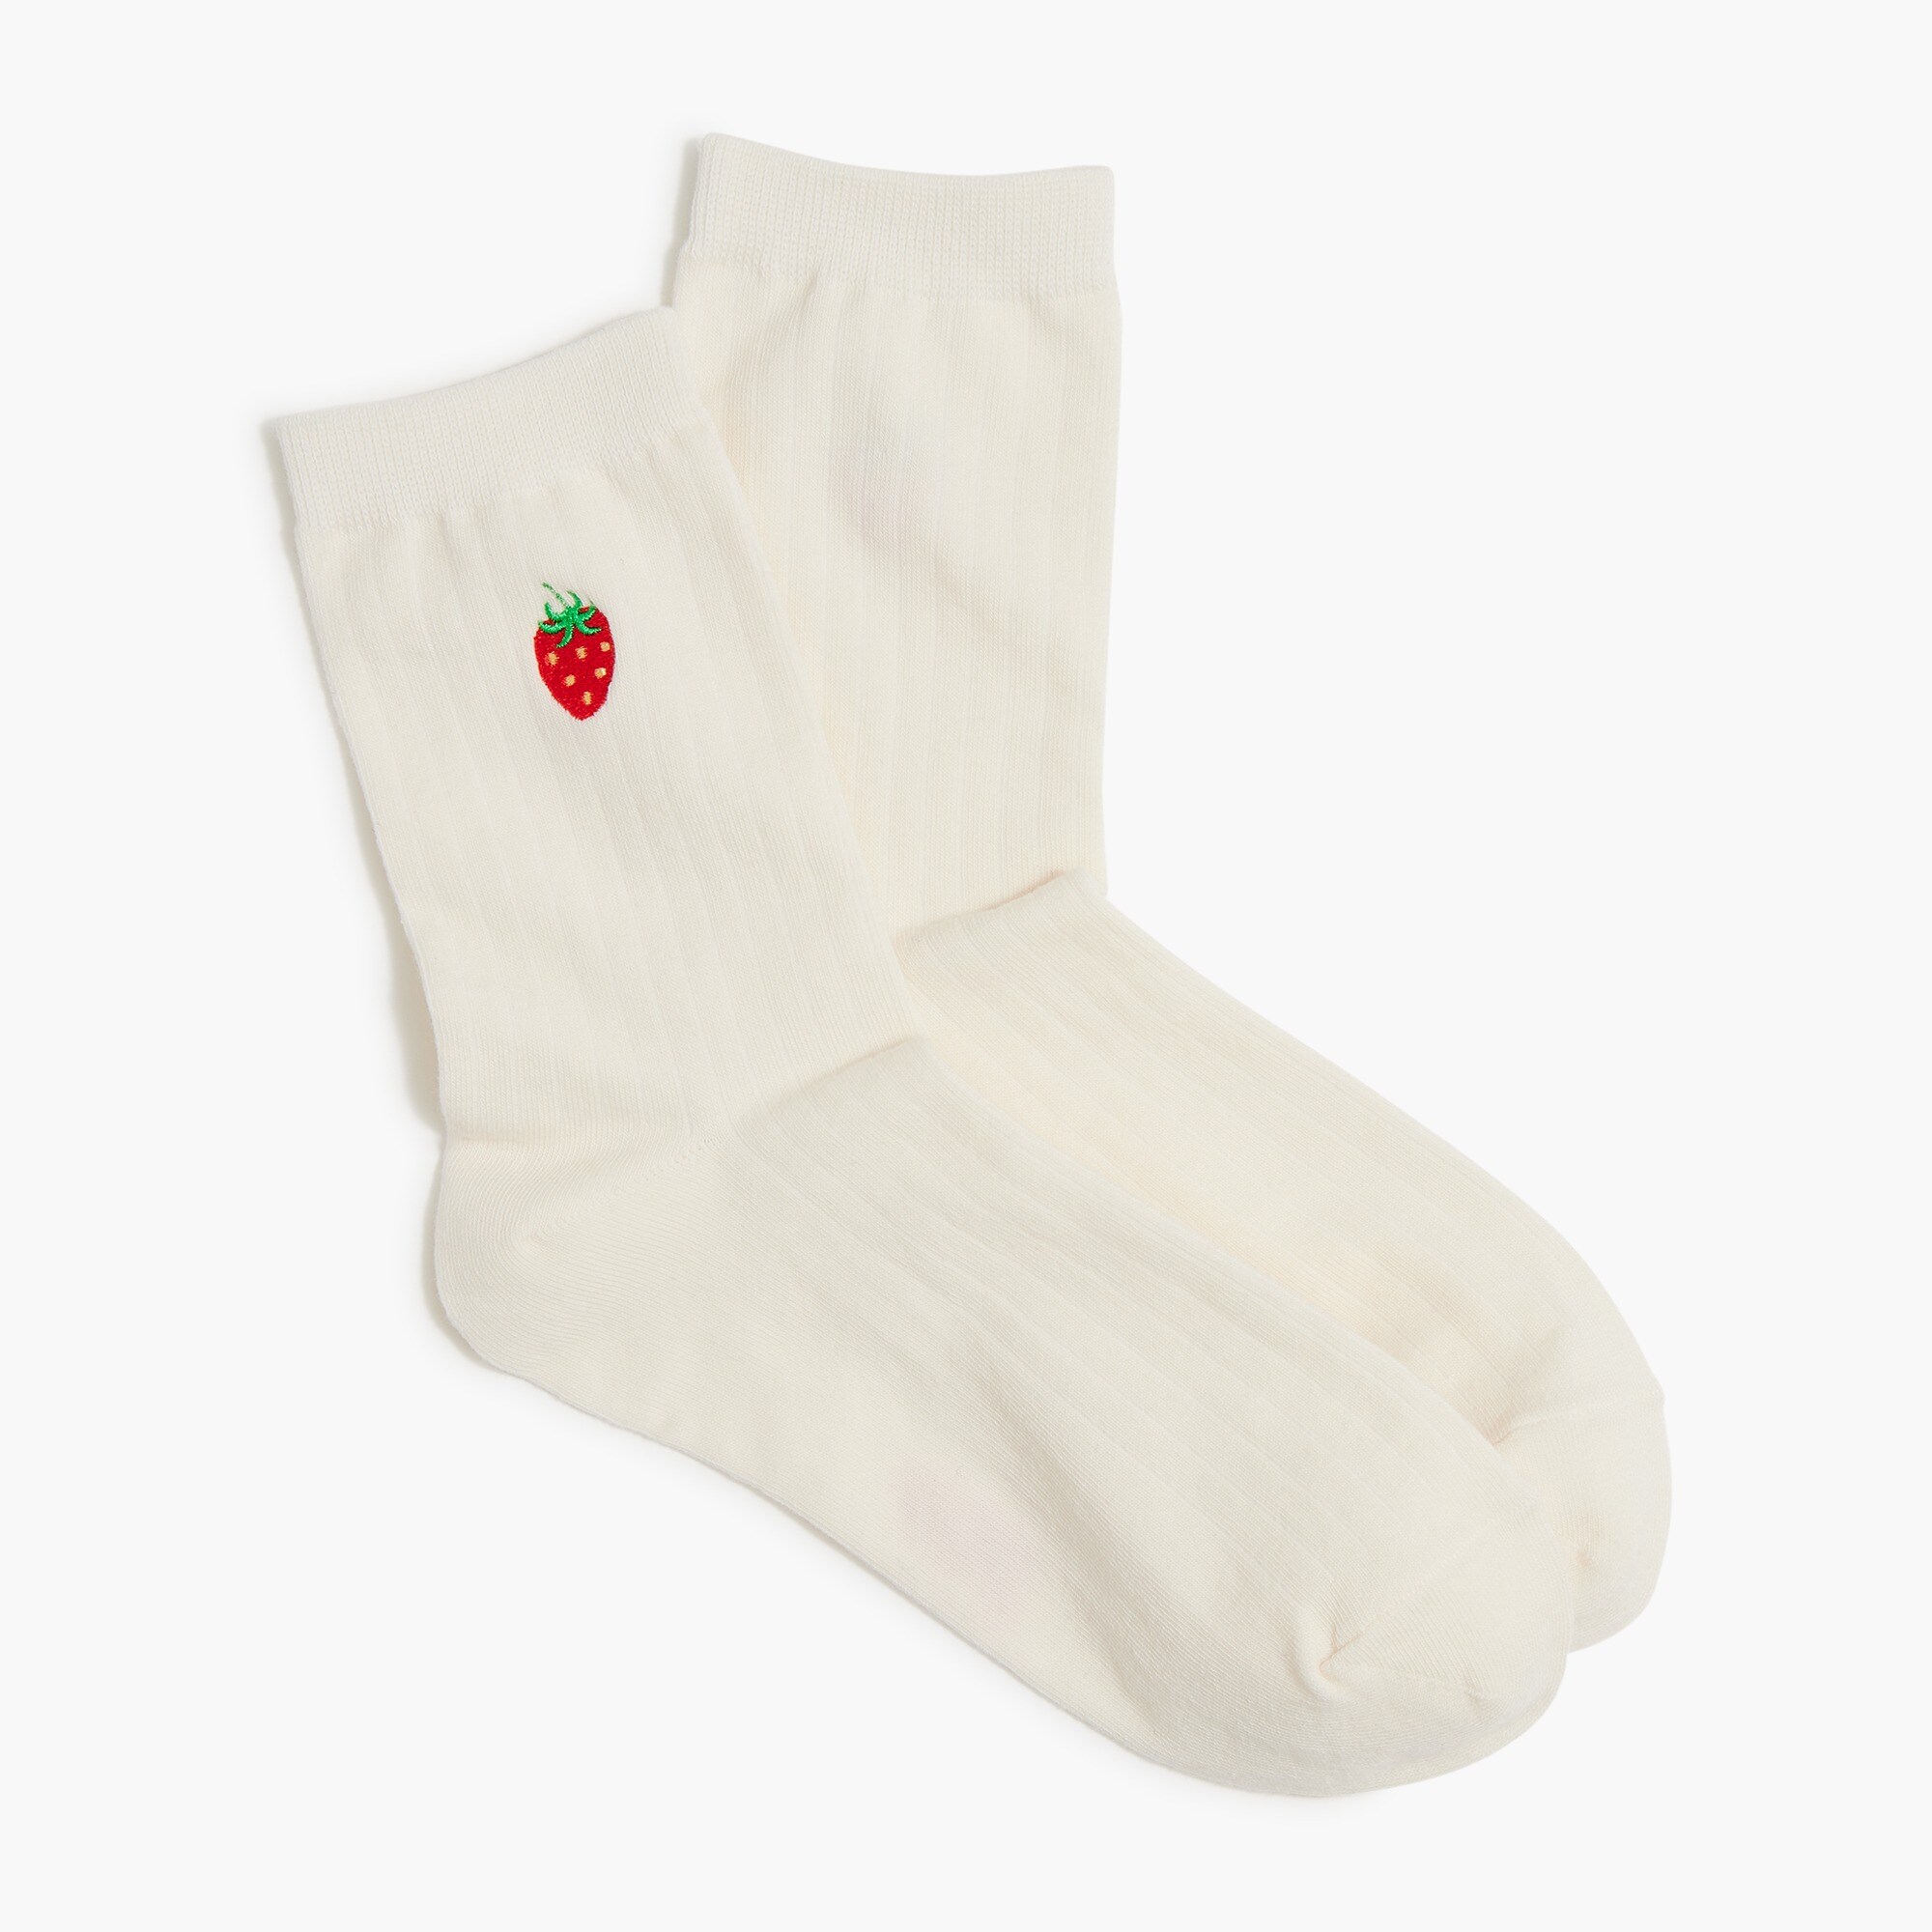  Embroidered strawberry socks